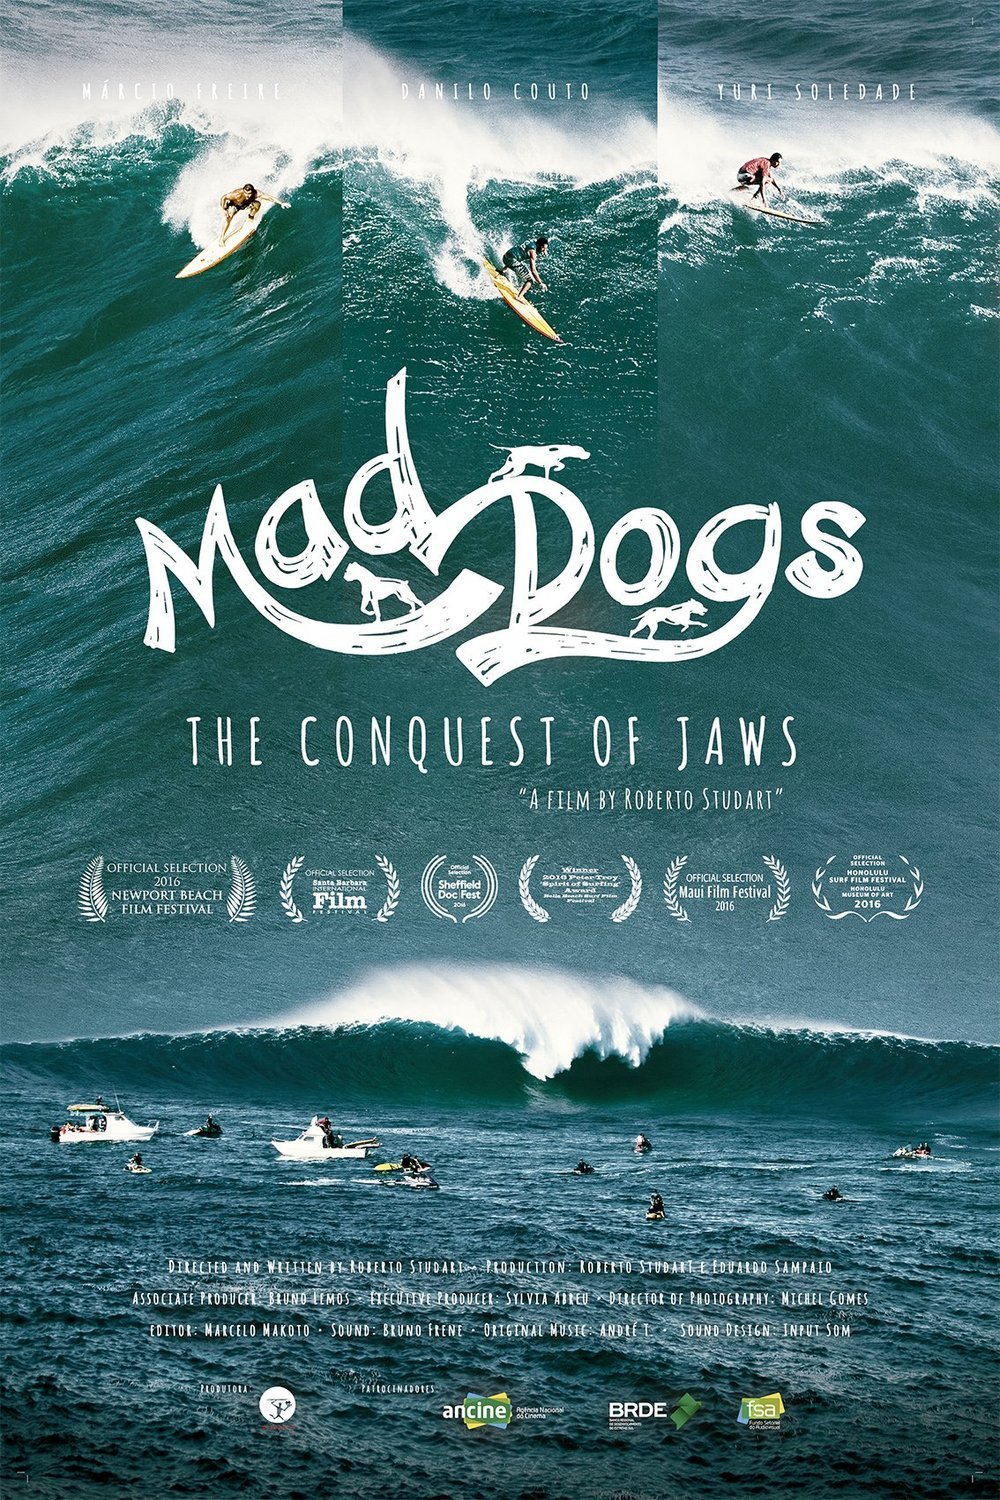 Portuguese poster of the movie Mad Dogs